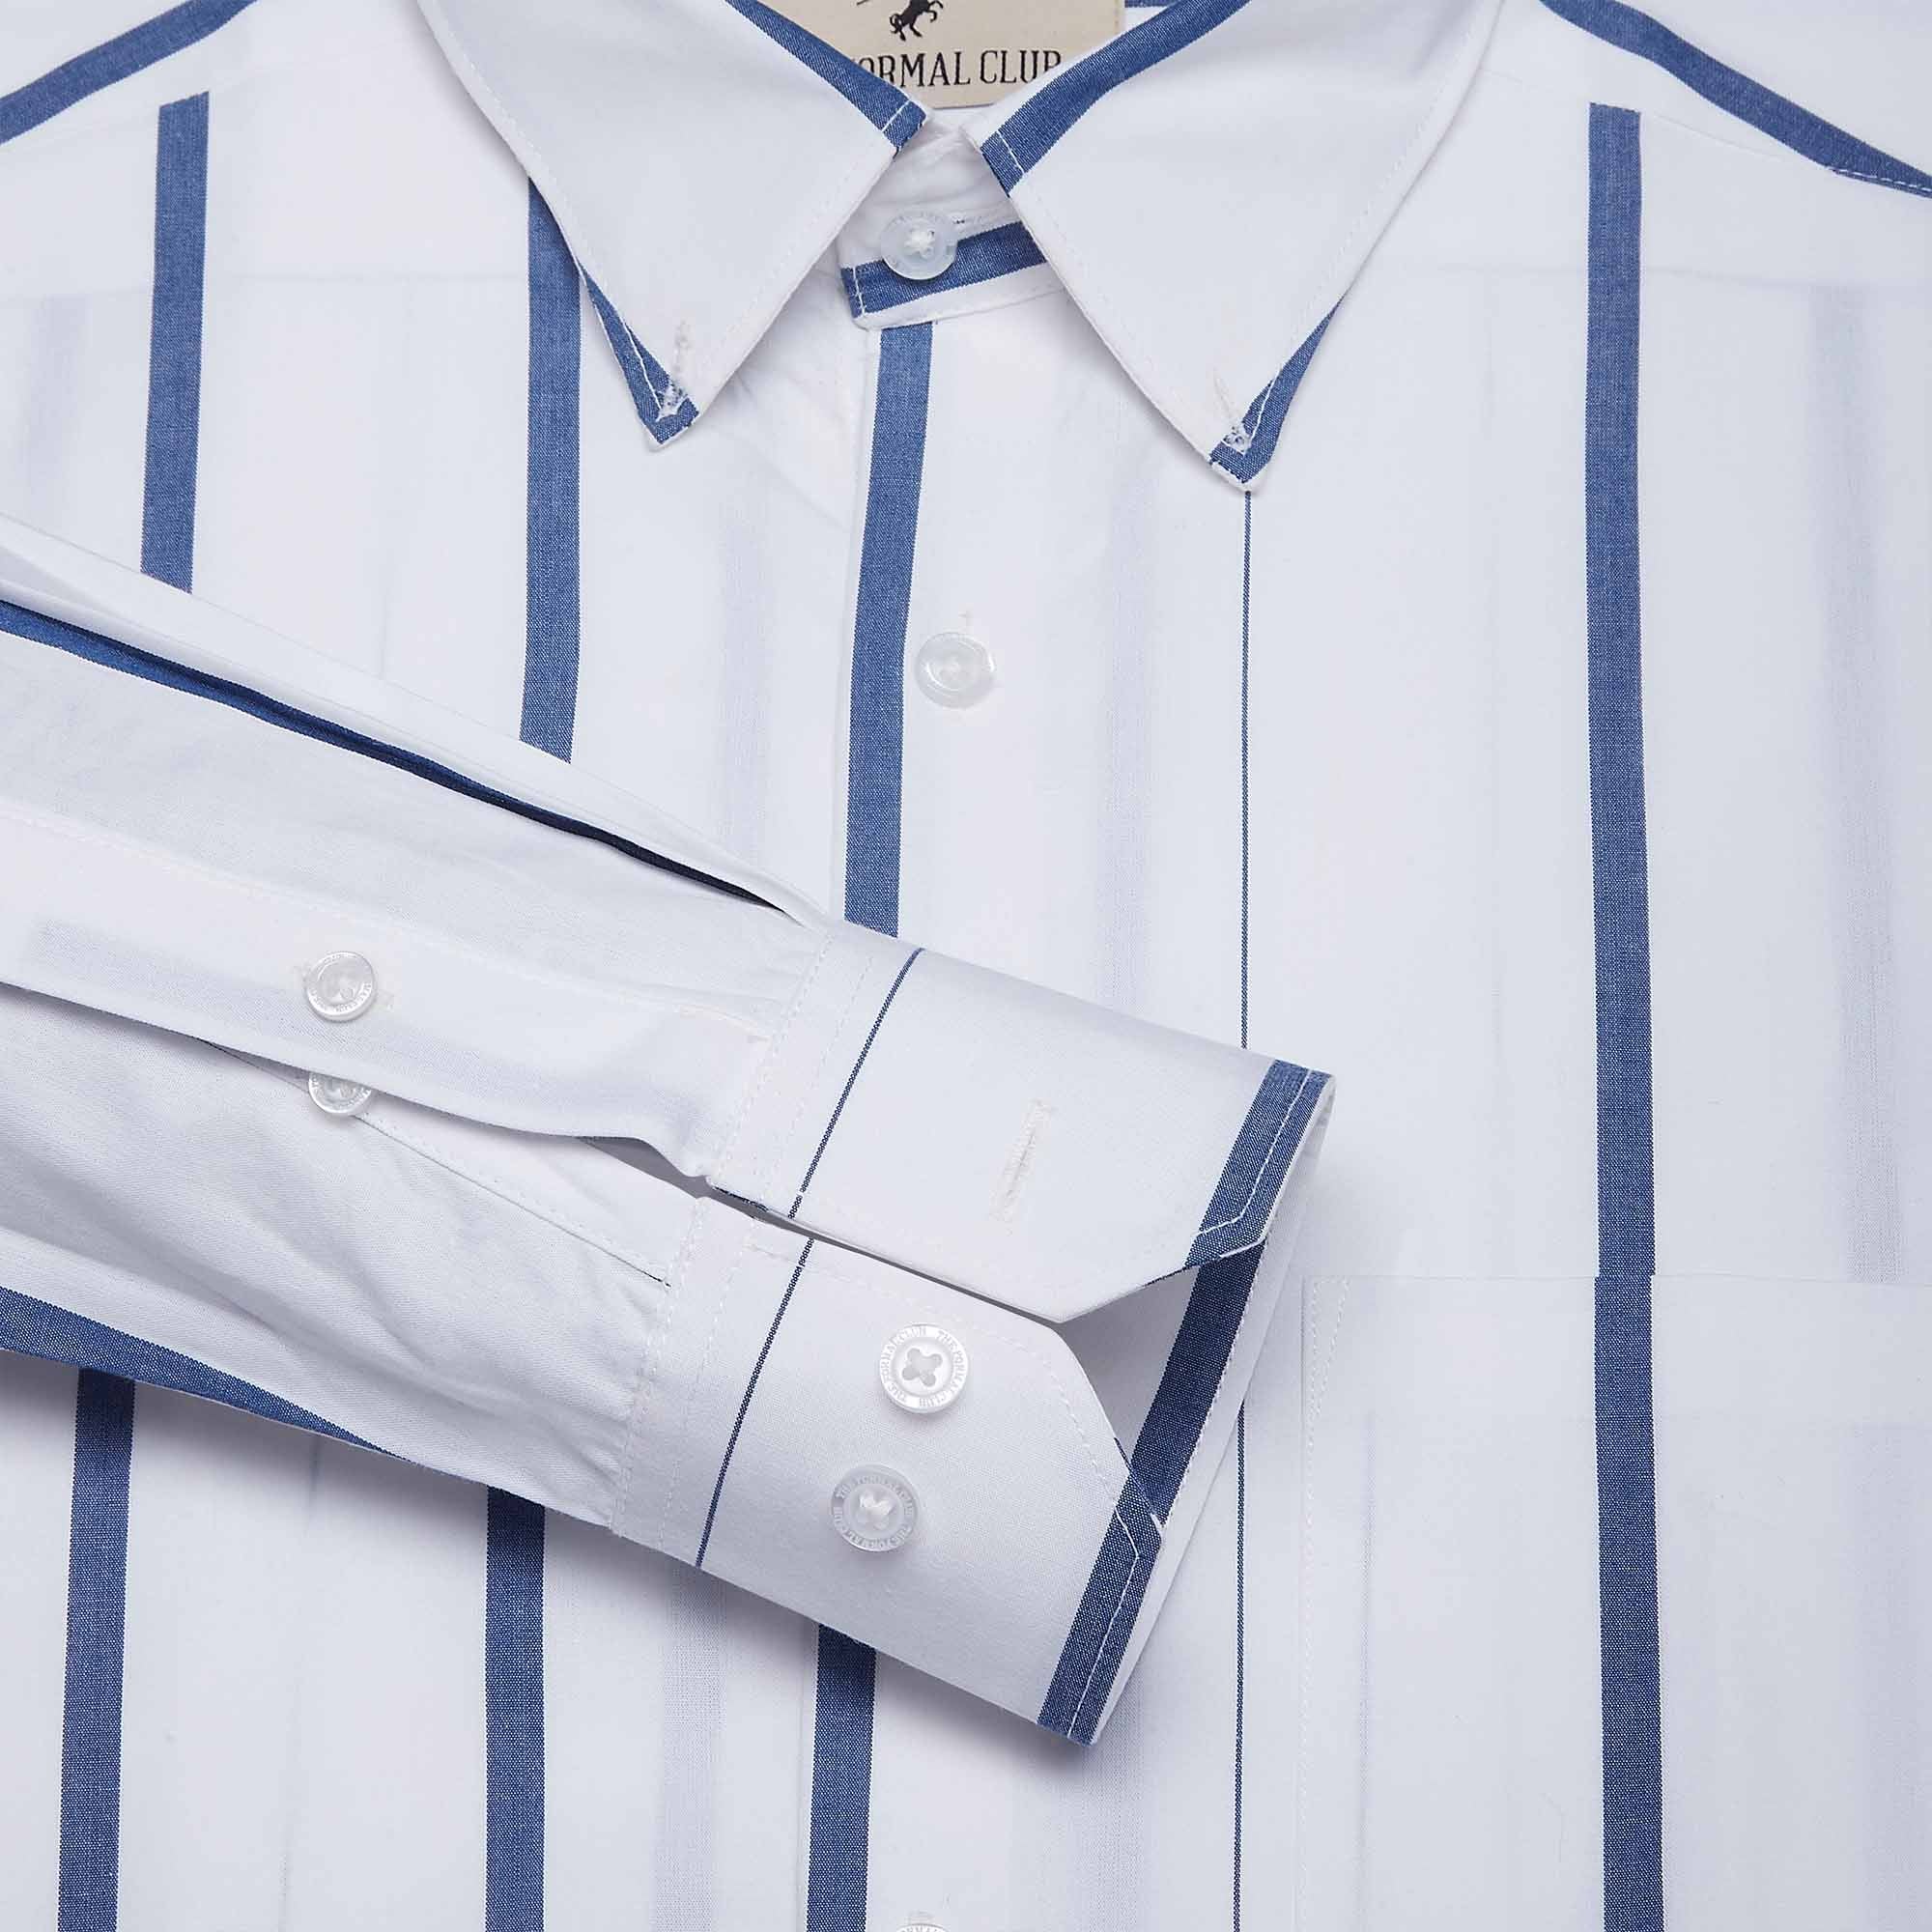 Skyline Cotton Stripes Shirt In White And Blue - The Formal Club